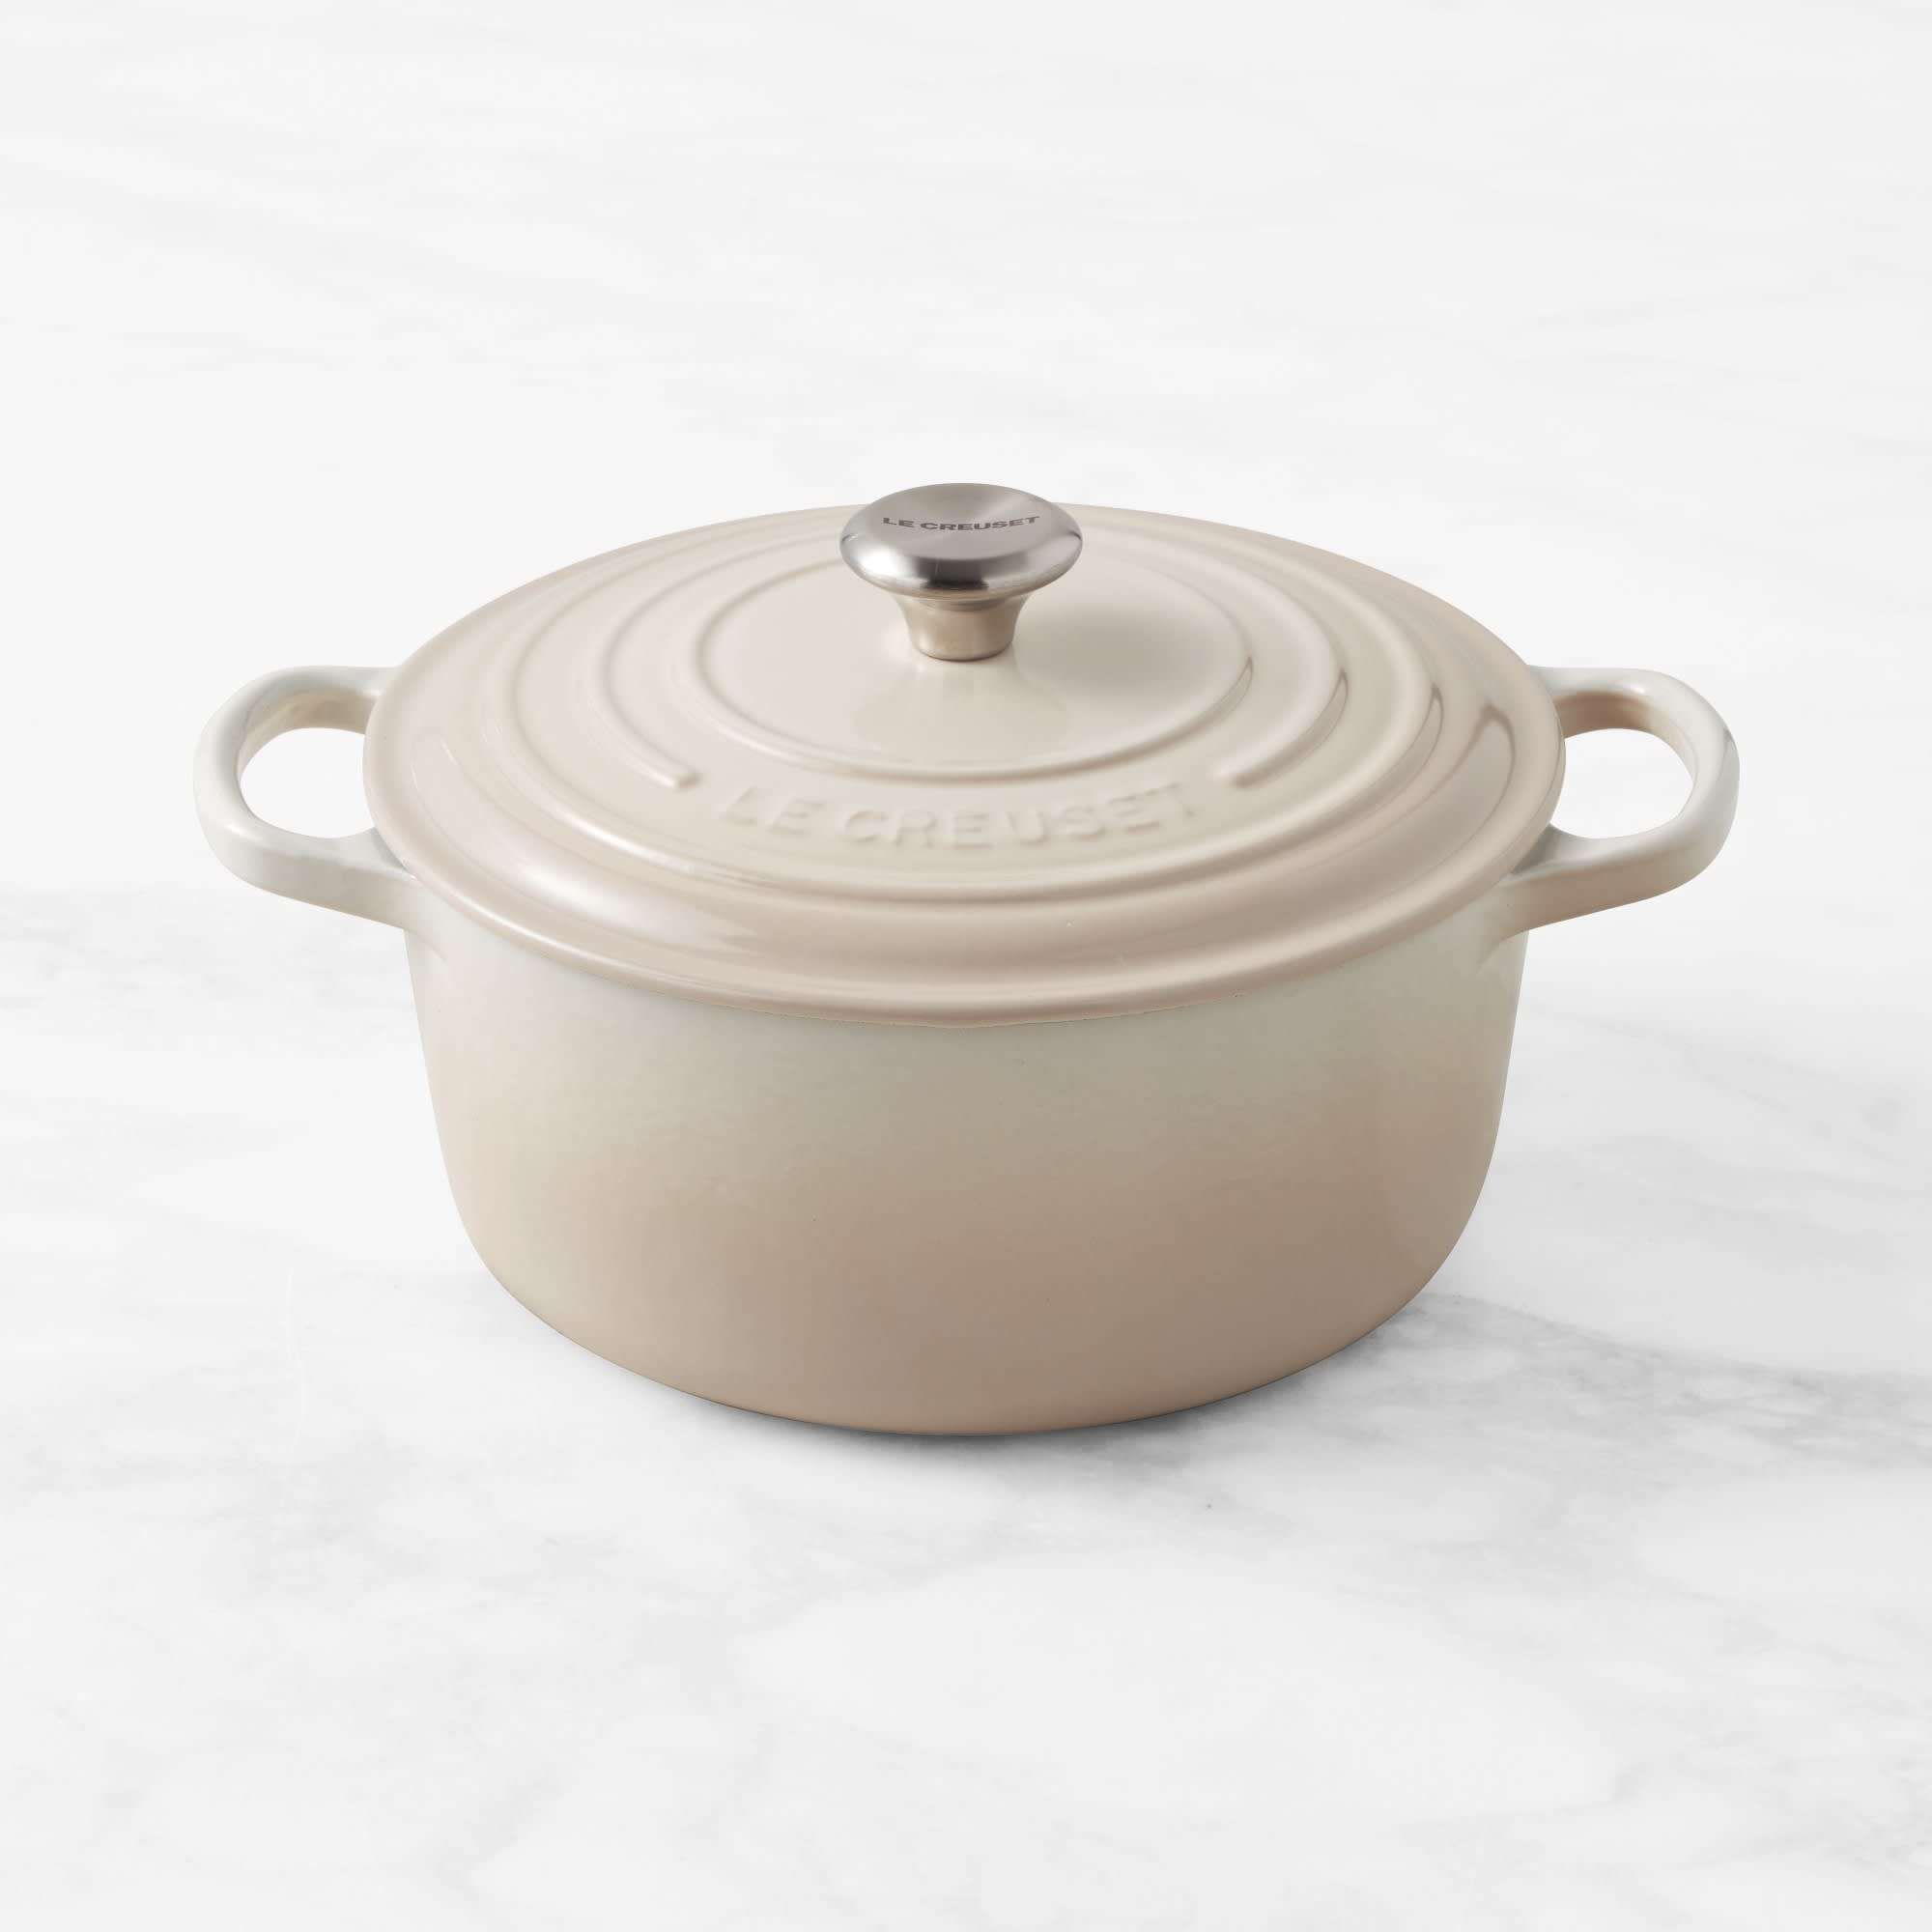 Le Creuset Fish Baker, Stoneware, 5 Colors on Food52